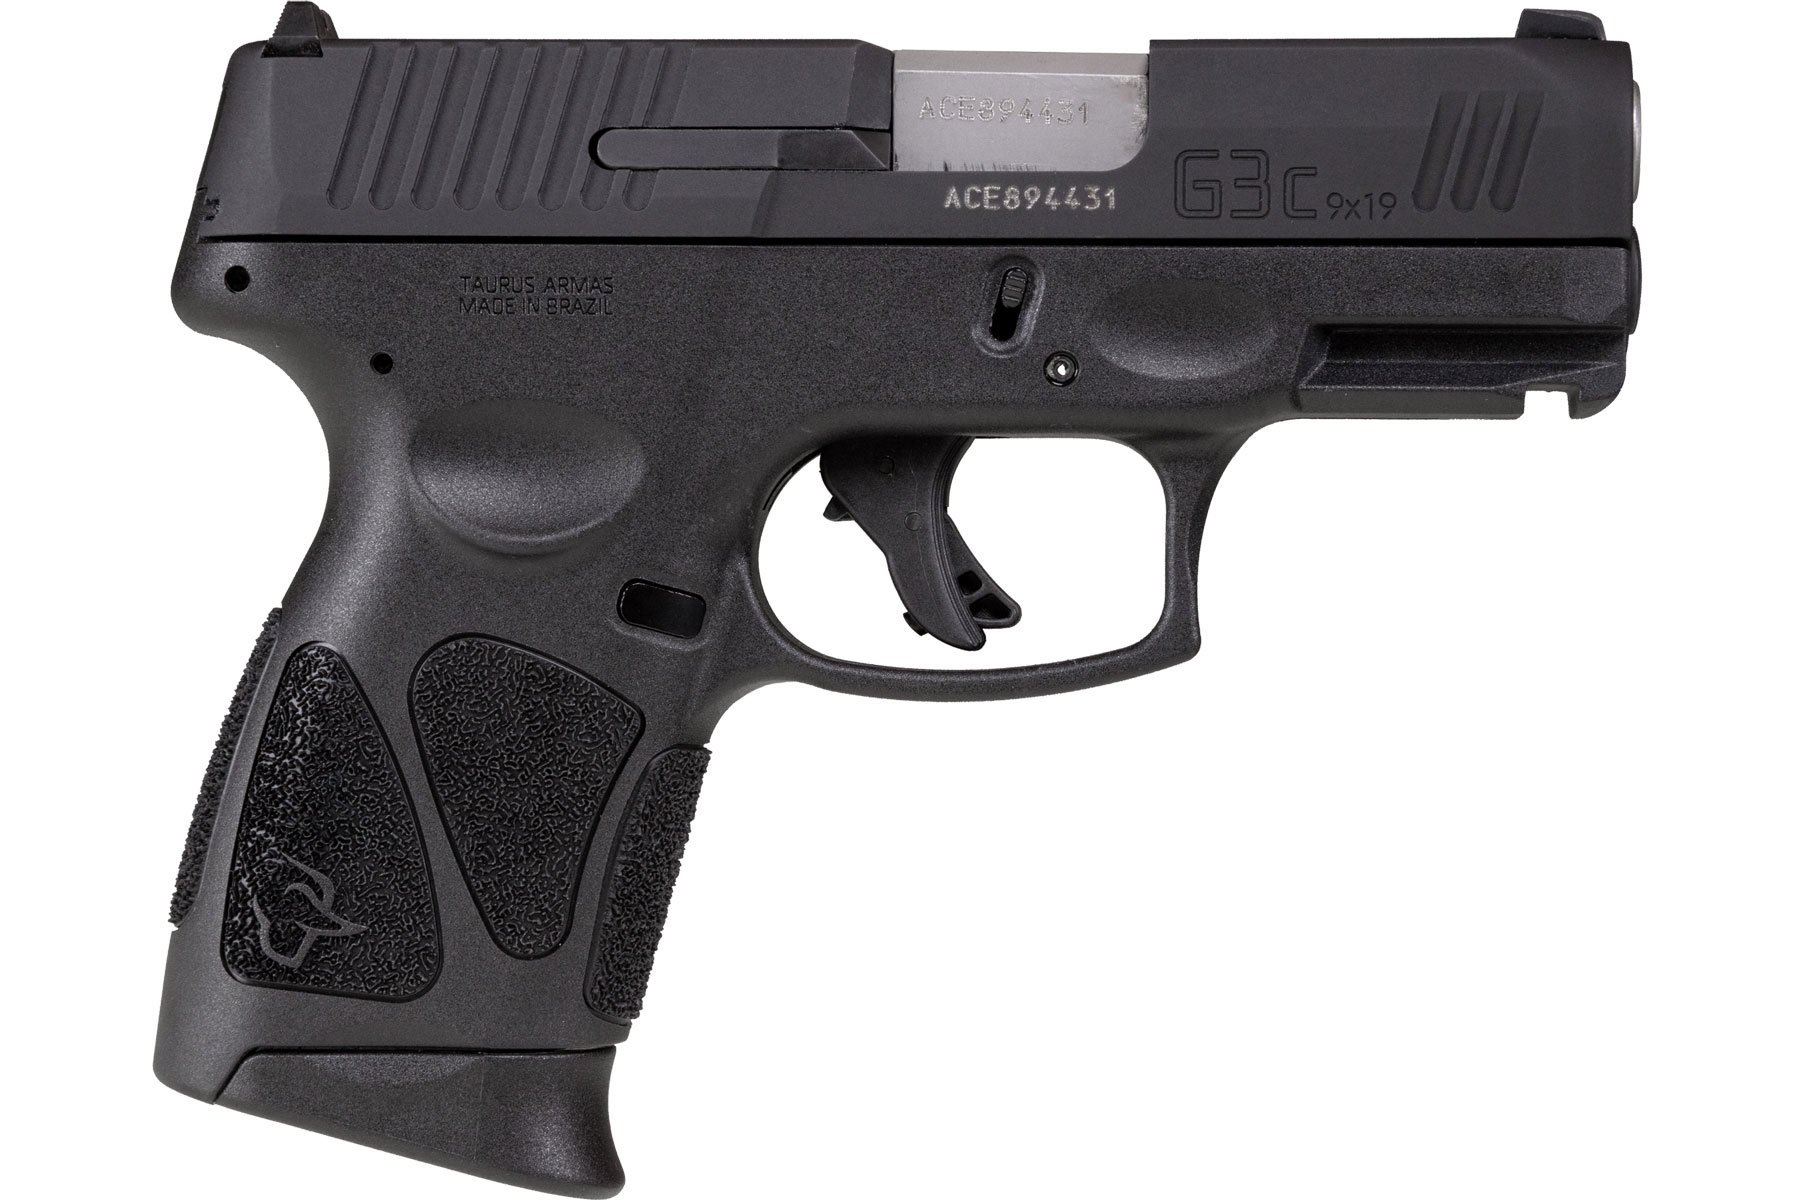 Taurus G3c Tenifer Matte Black 9mm Luger Compact 12 Rds. Non-Manual Safety